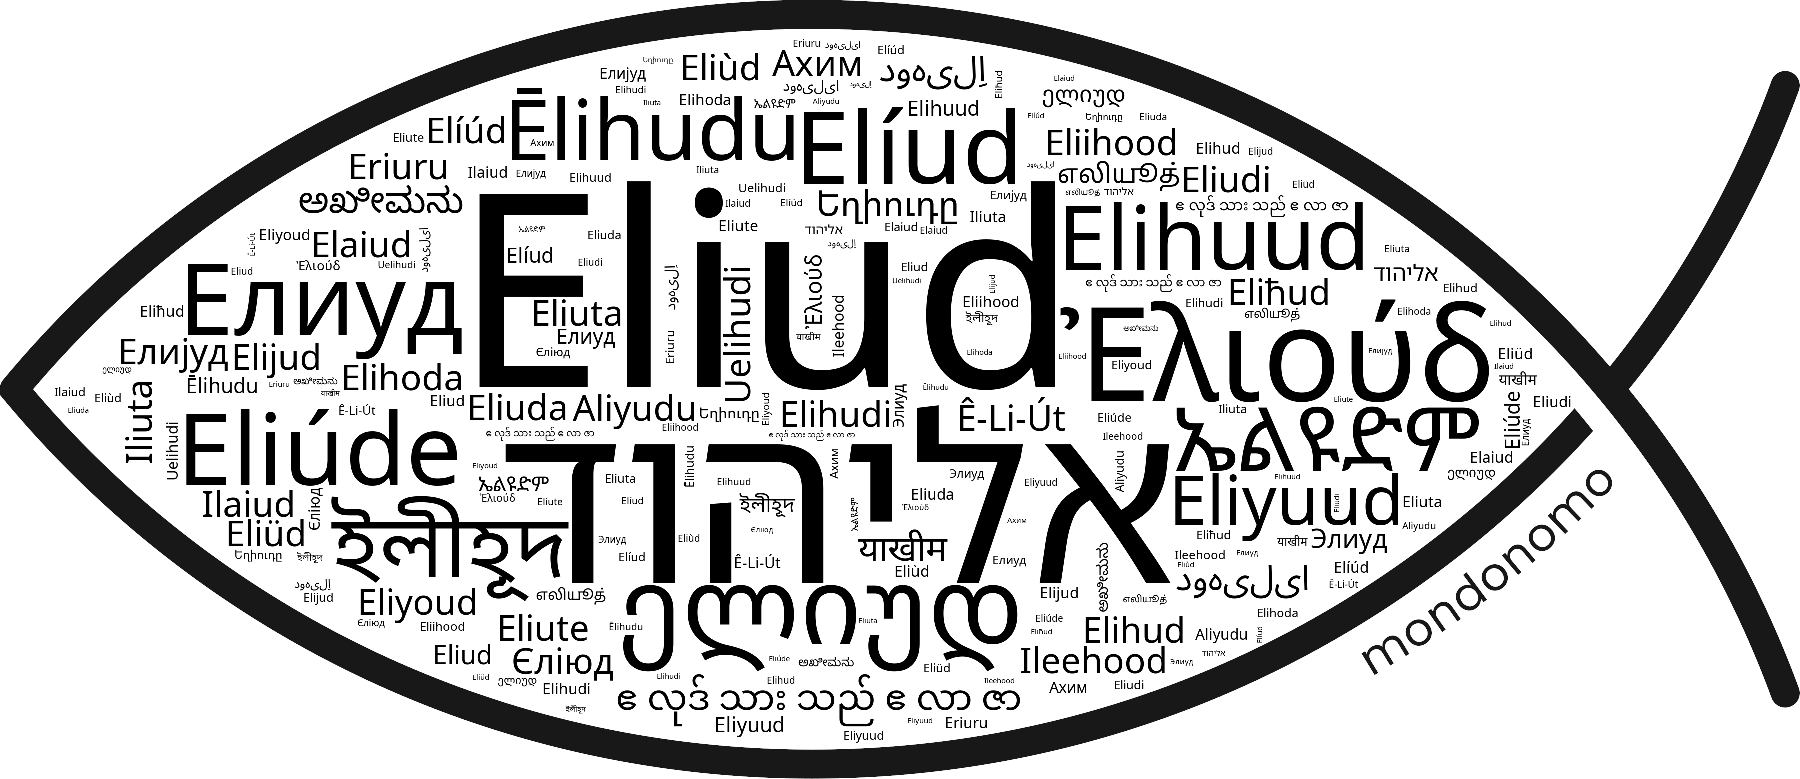 Name Eliud in the world's Bibles